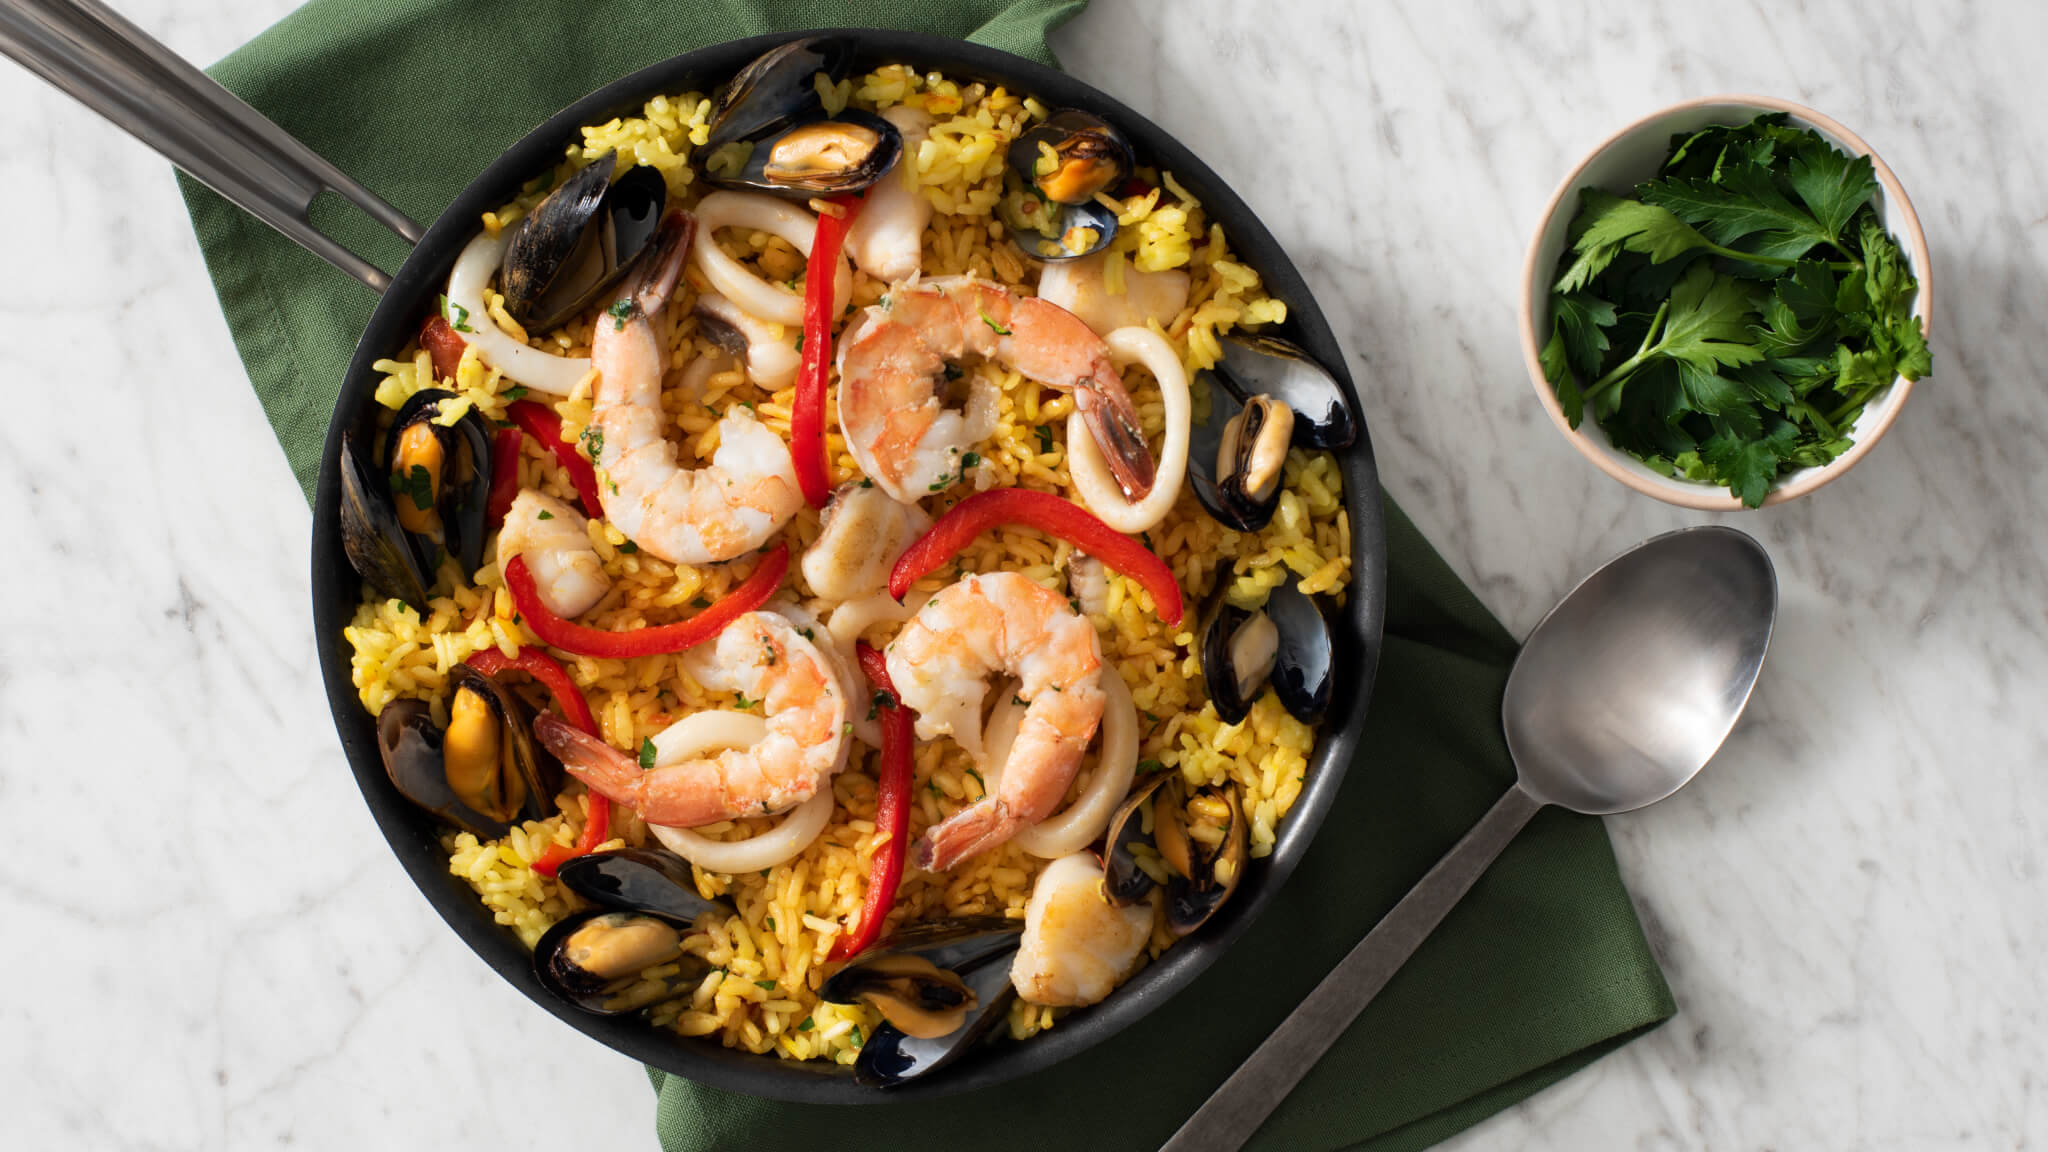 Authentic Spanish Paella with Seafood